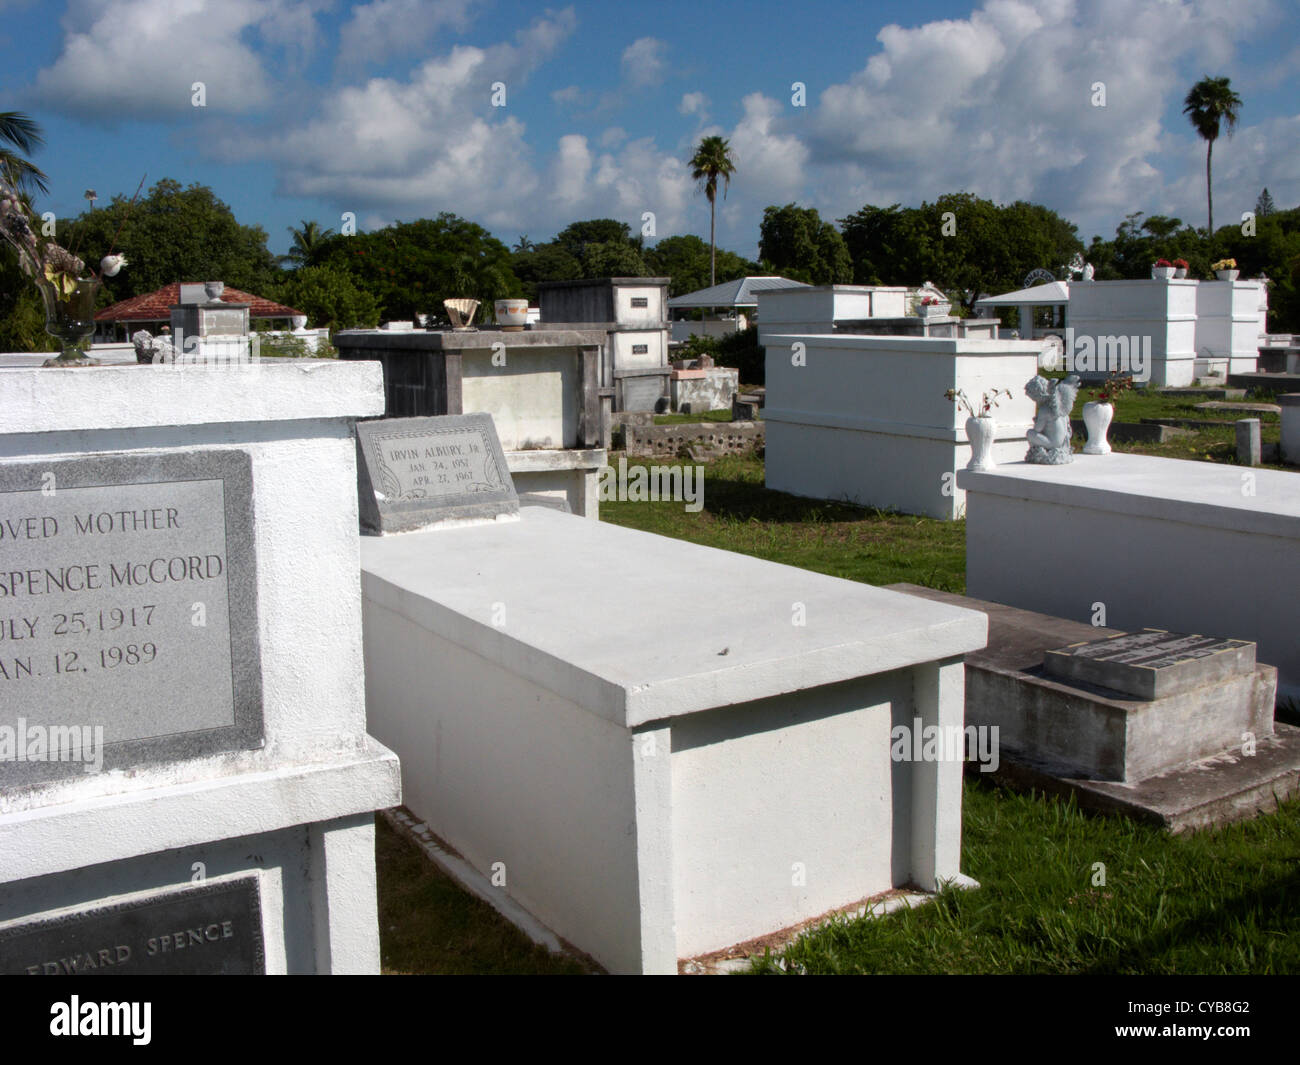 above ground tombs in key west cemetery florida usa Stock Photo